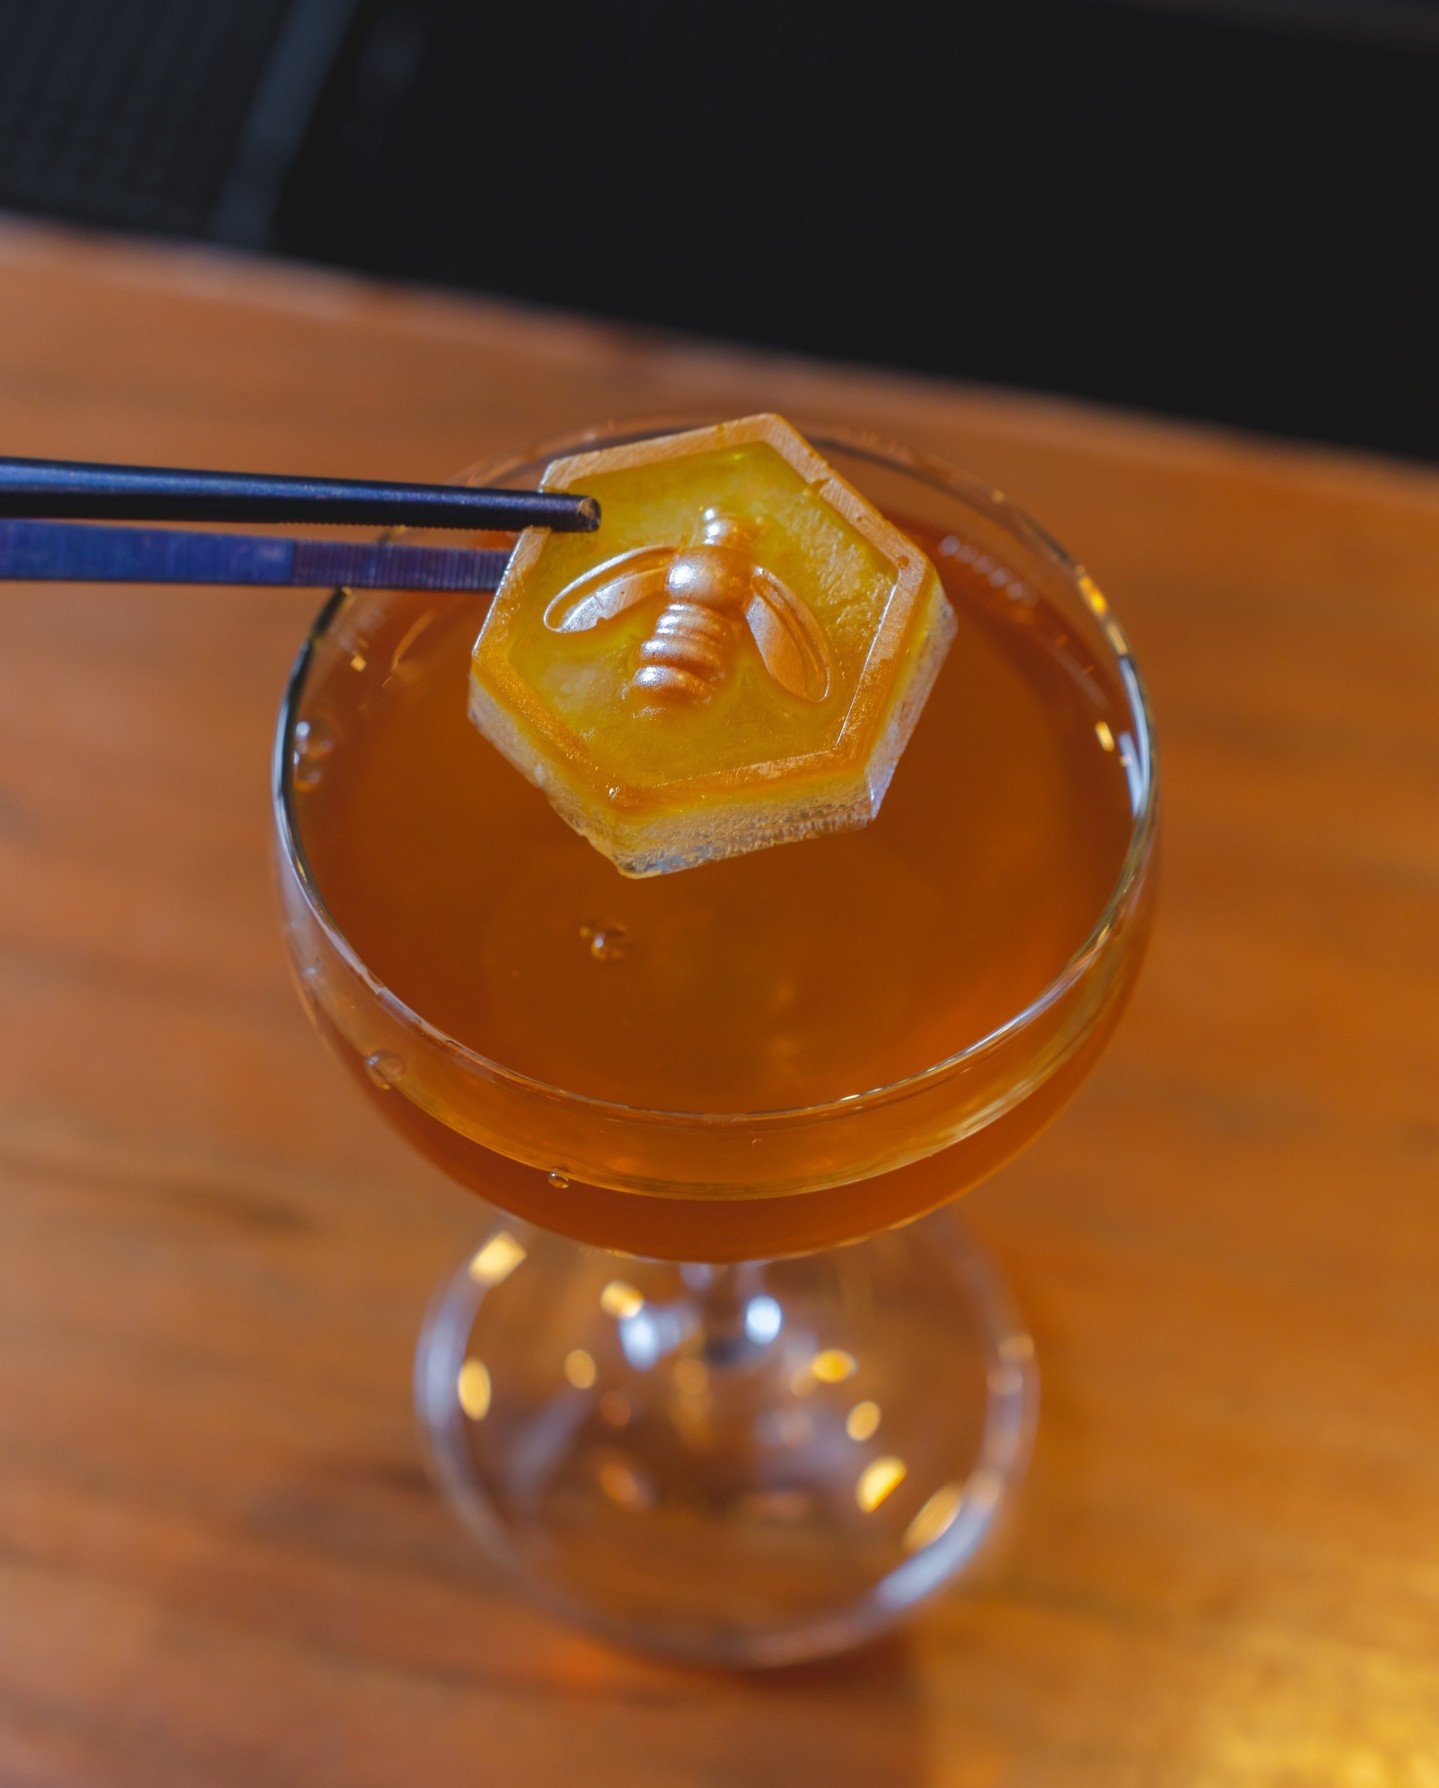 Buzzing with flavor! 🐝✨ Sip on our tantalizing Kentucky Sting cocktail, where Beeswax-infused Yellowstone Bourbon meets the sweetness of local honey, a hint of lavender,  the unique bitterness of Amaro Nonino, and crowned with a honeycomb cube. 🍯